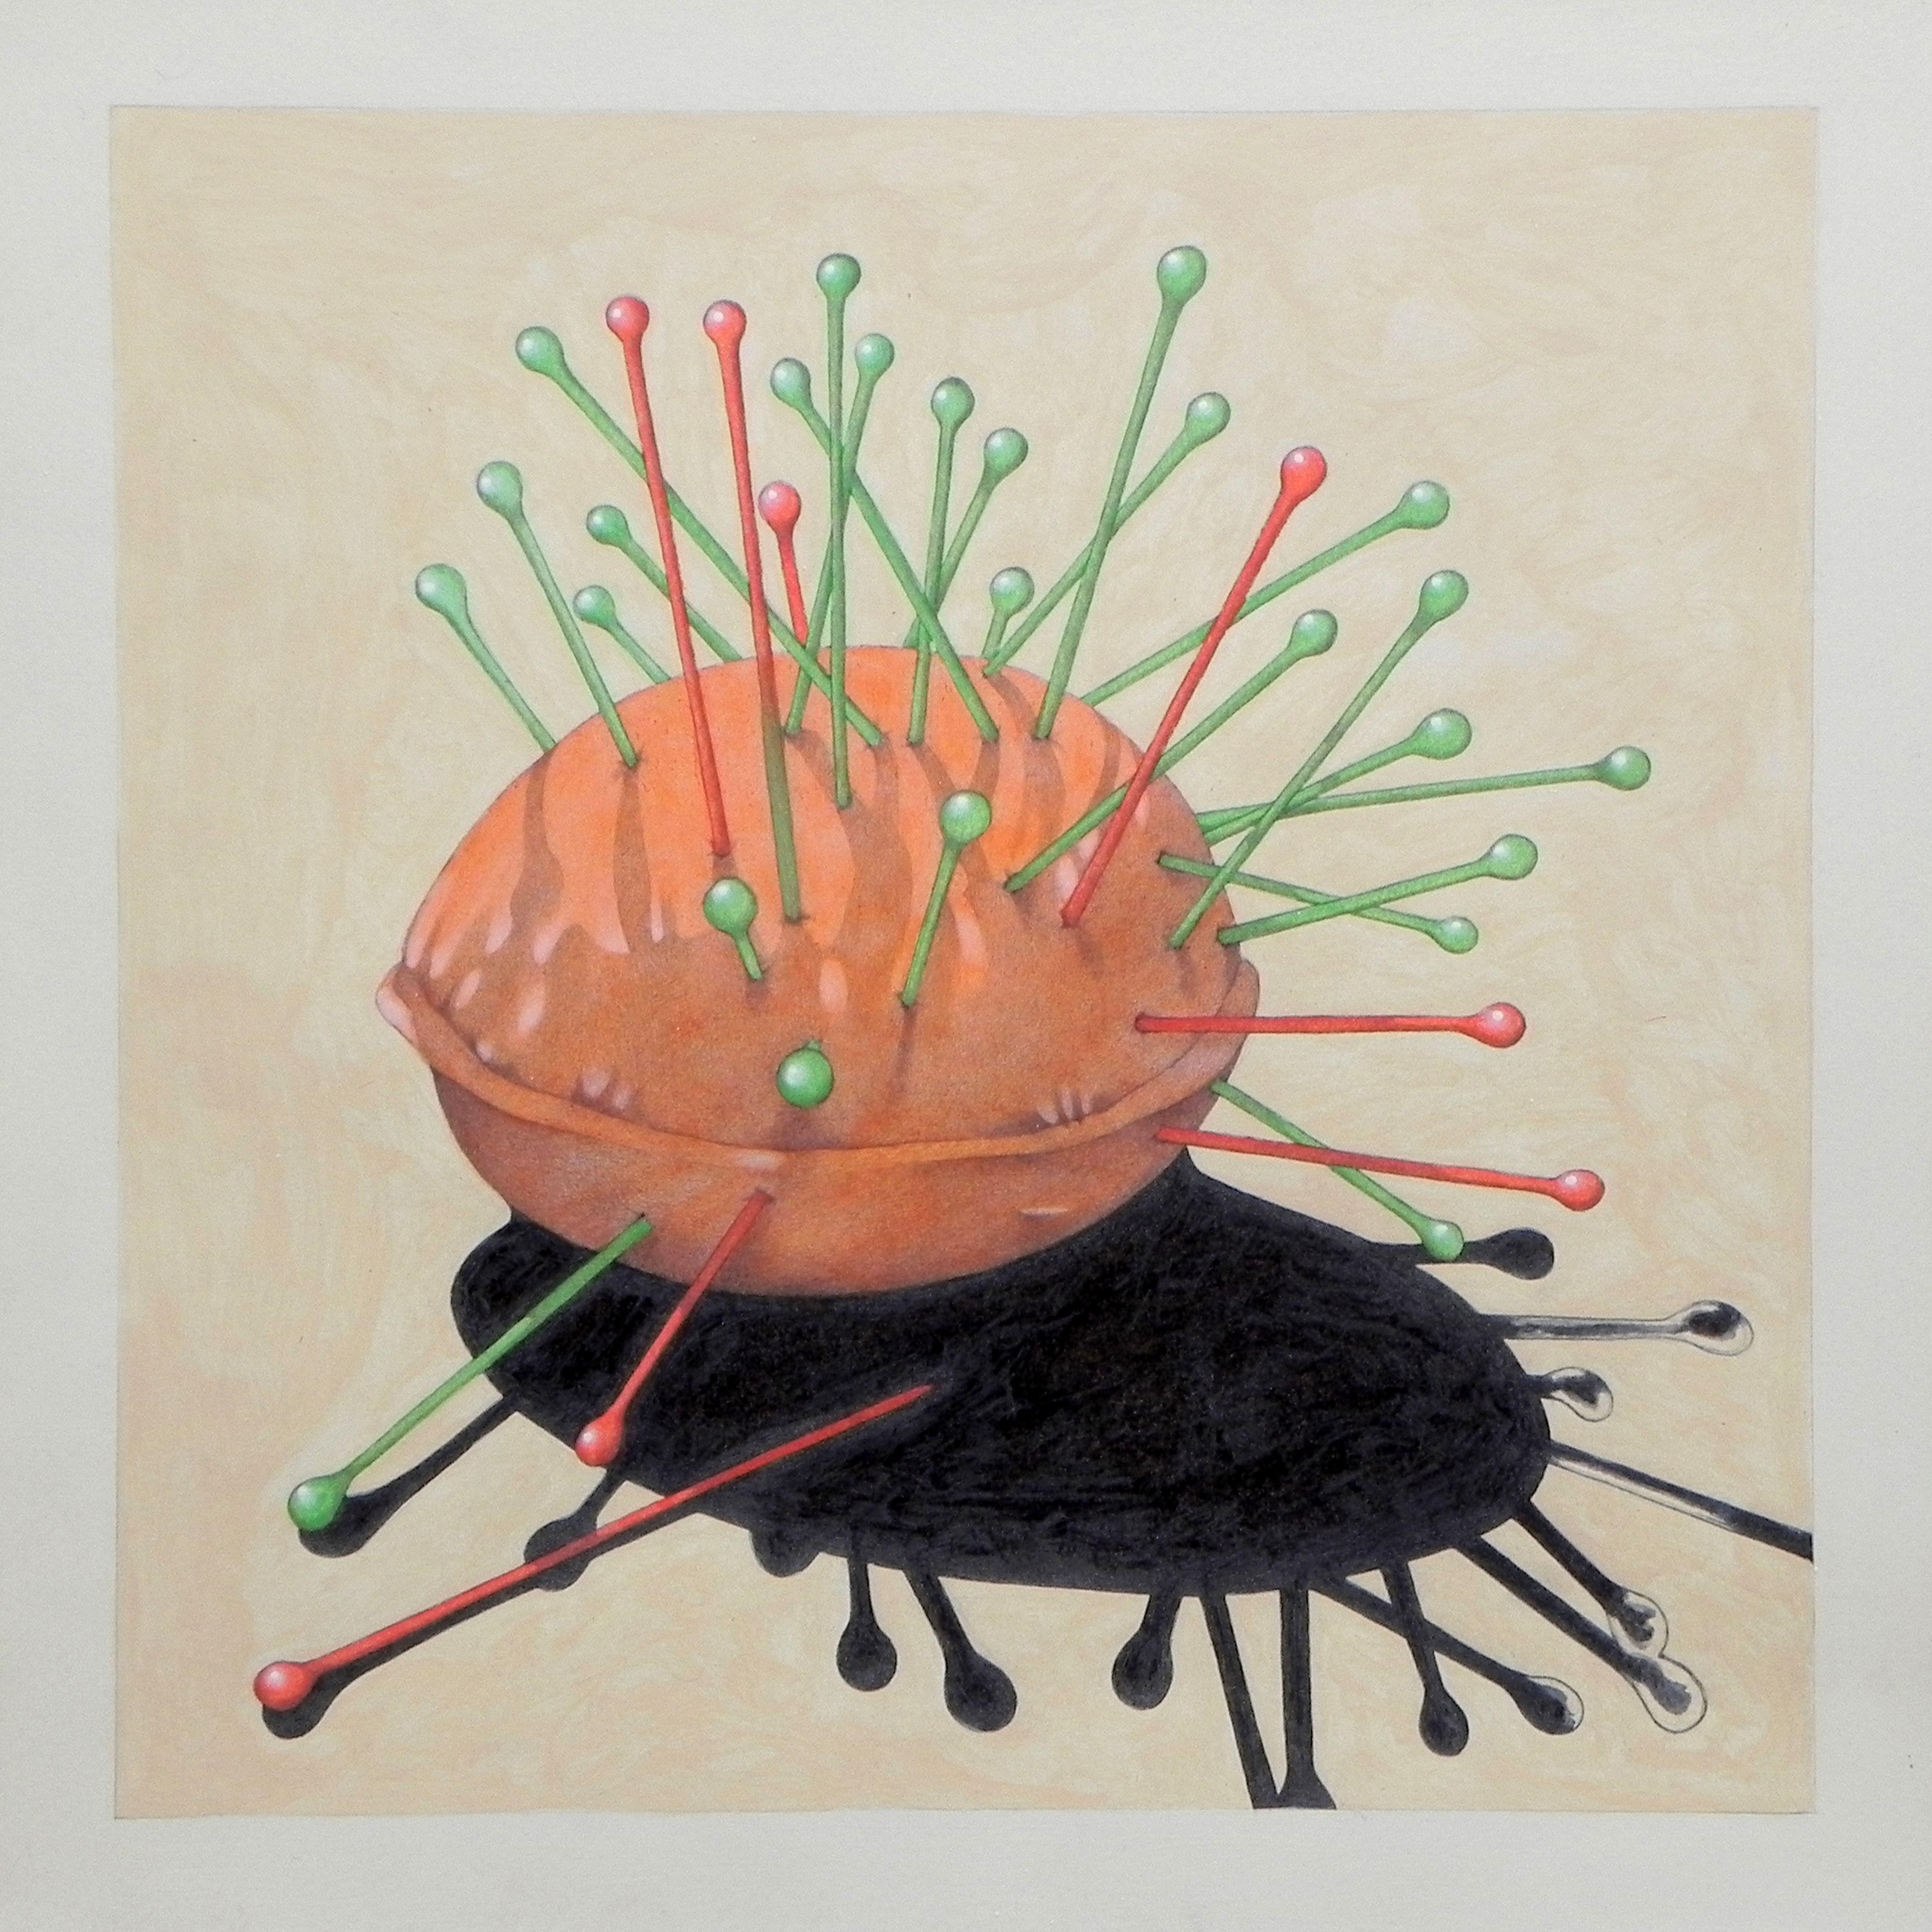 Pincushion, Painting, Oil on Paper